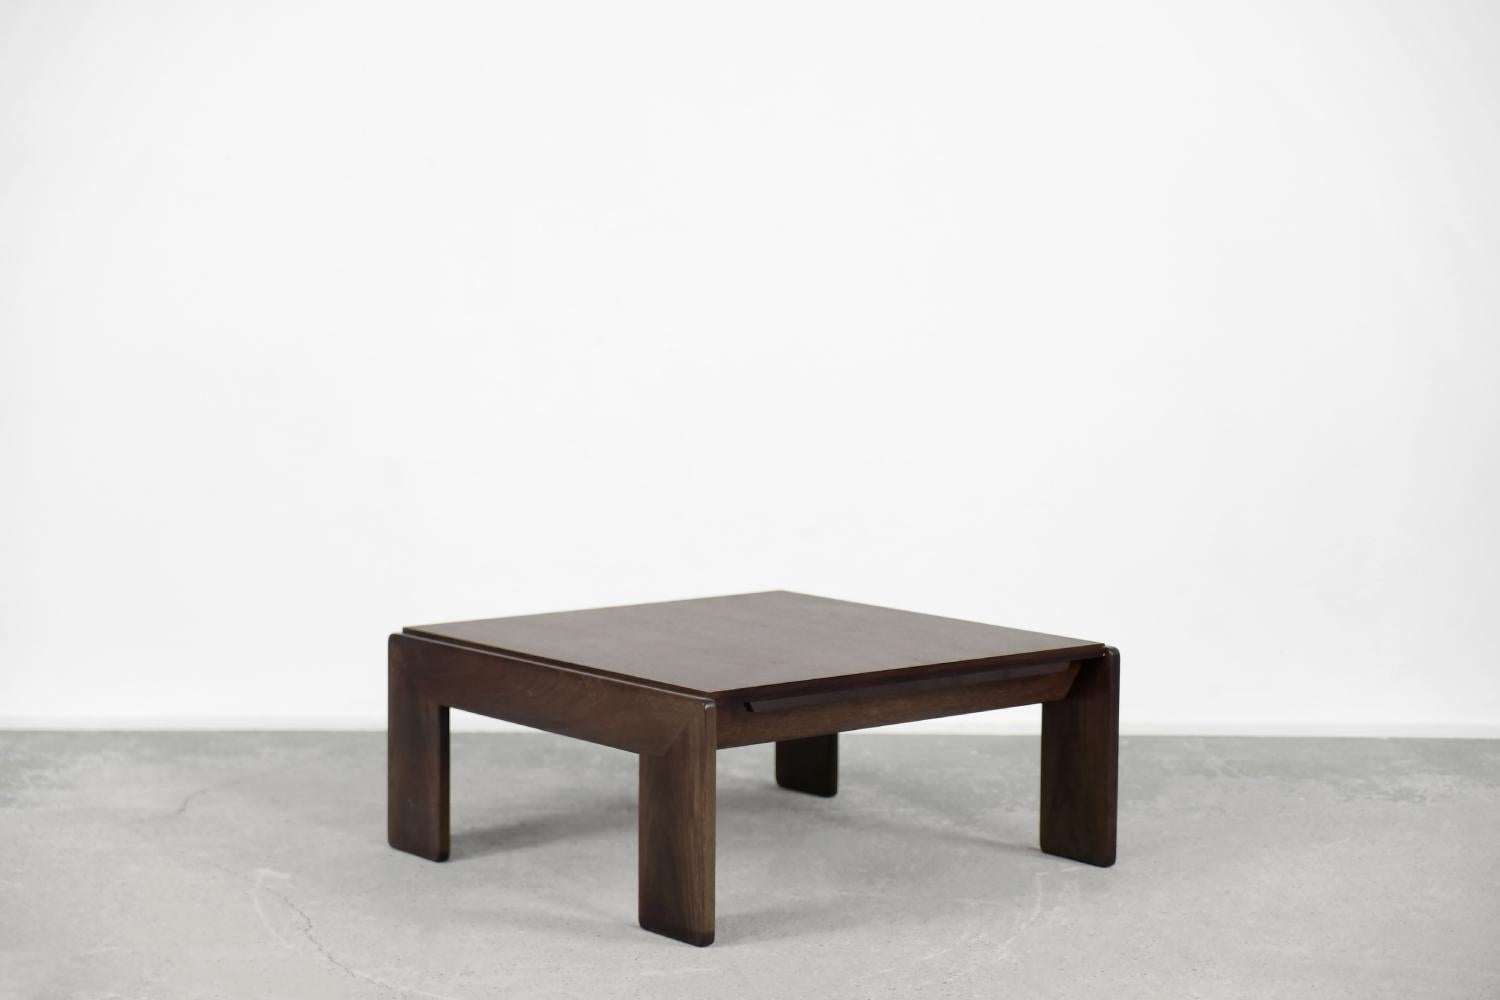 This low coffee table was designed by the architectural duo Tobia and Afra Scarpa in 1962 and manufactured by the Italian manufacture Gavina. It is an early production table from the Bastiano series. It is made of teak wood and finished in a dark